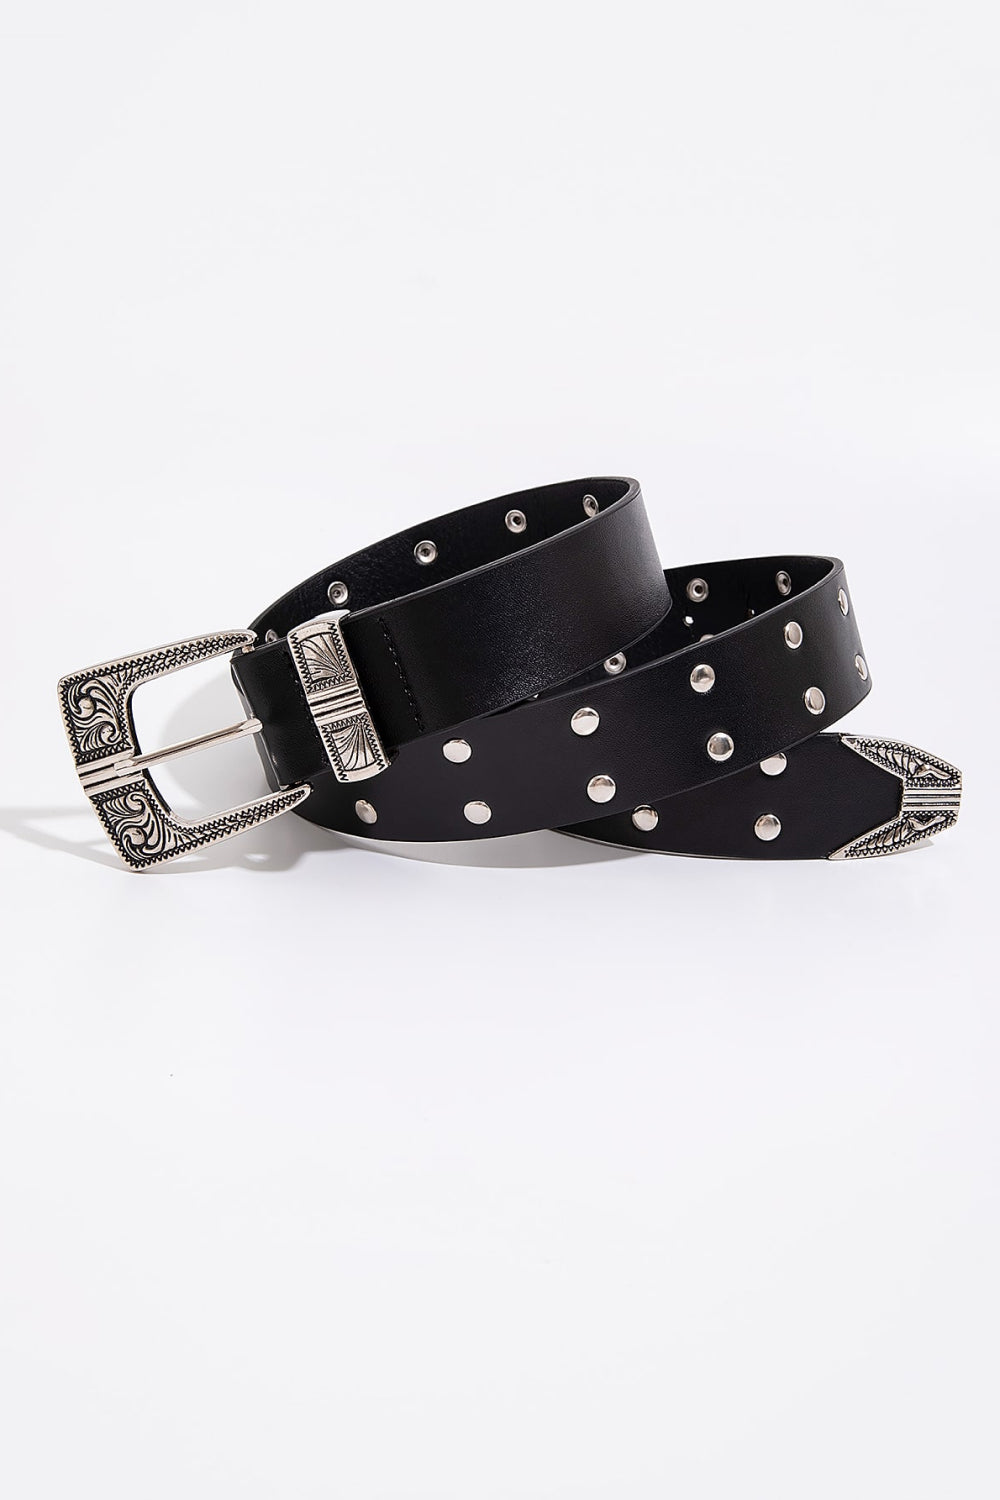 White Smoke Double Row Studded PU Leather Belt Sentient Beauty Fashions *Accessories